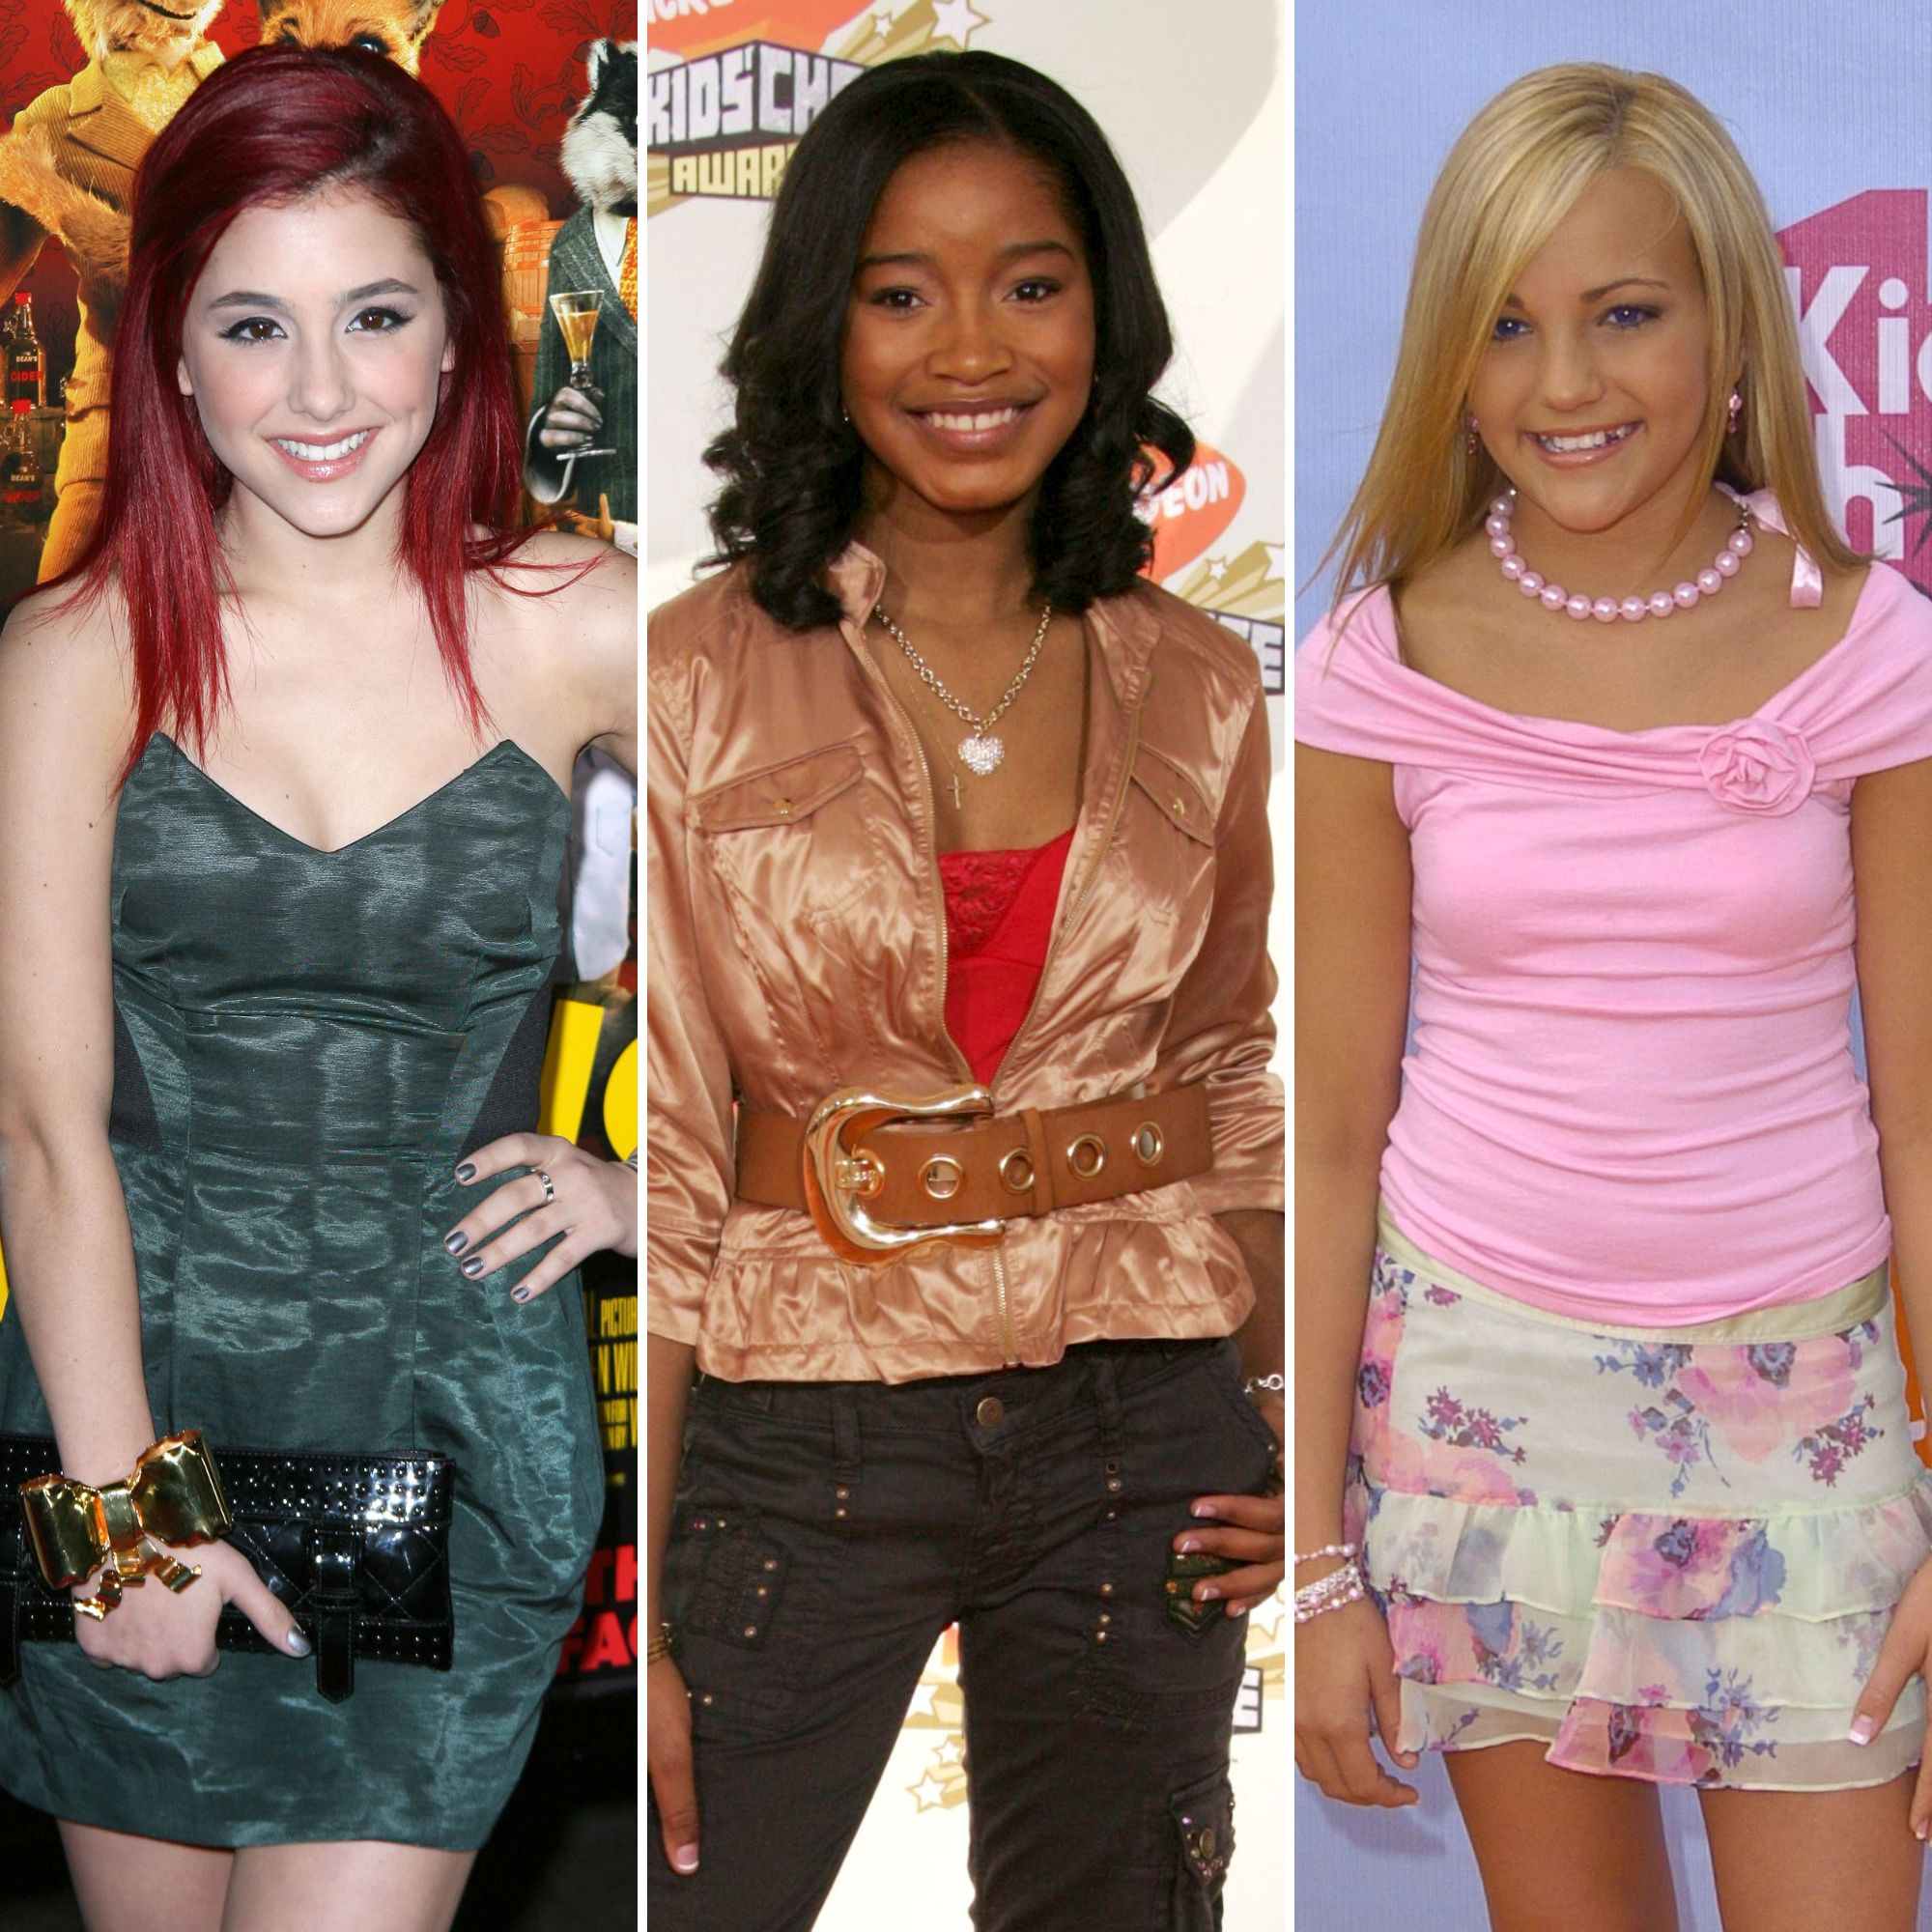 14 Eyar Girl Xxx - Nickelodeon Girls Who Look Different: Then, Now Photos